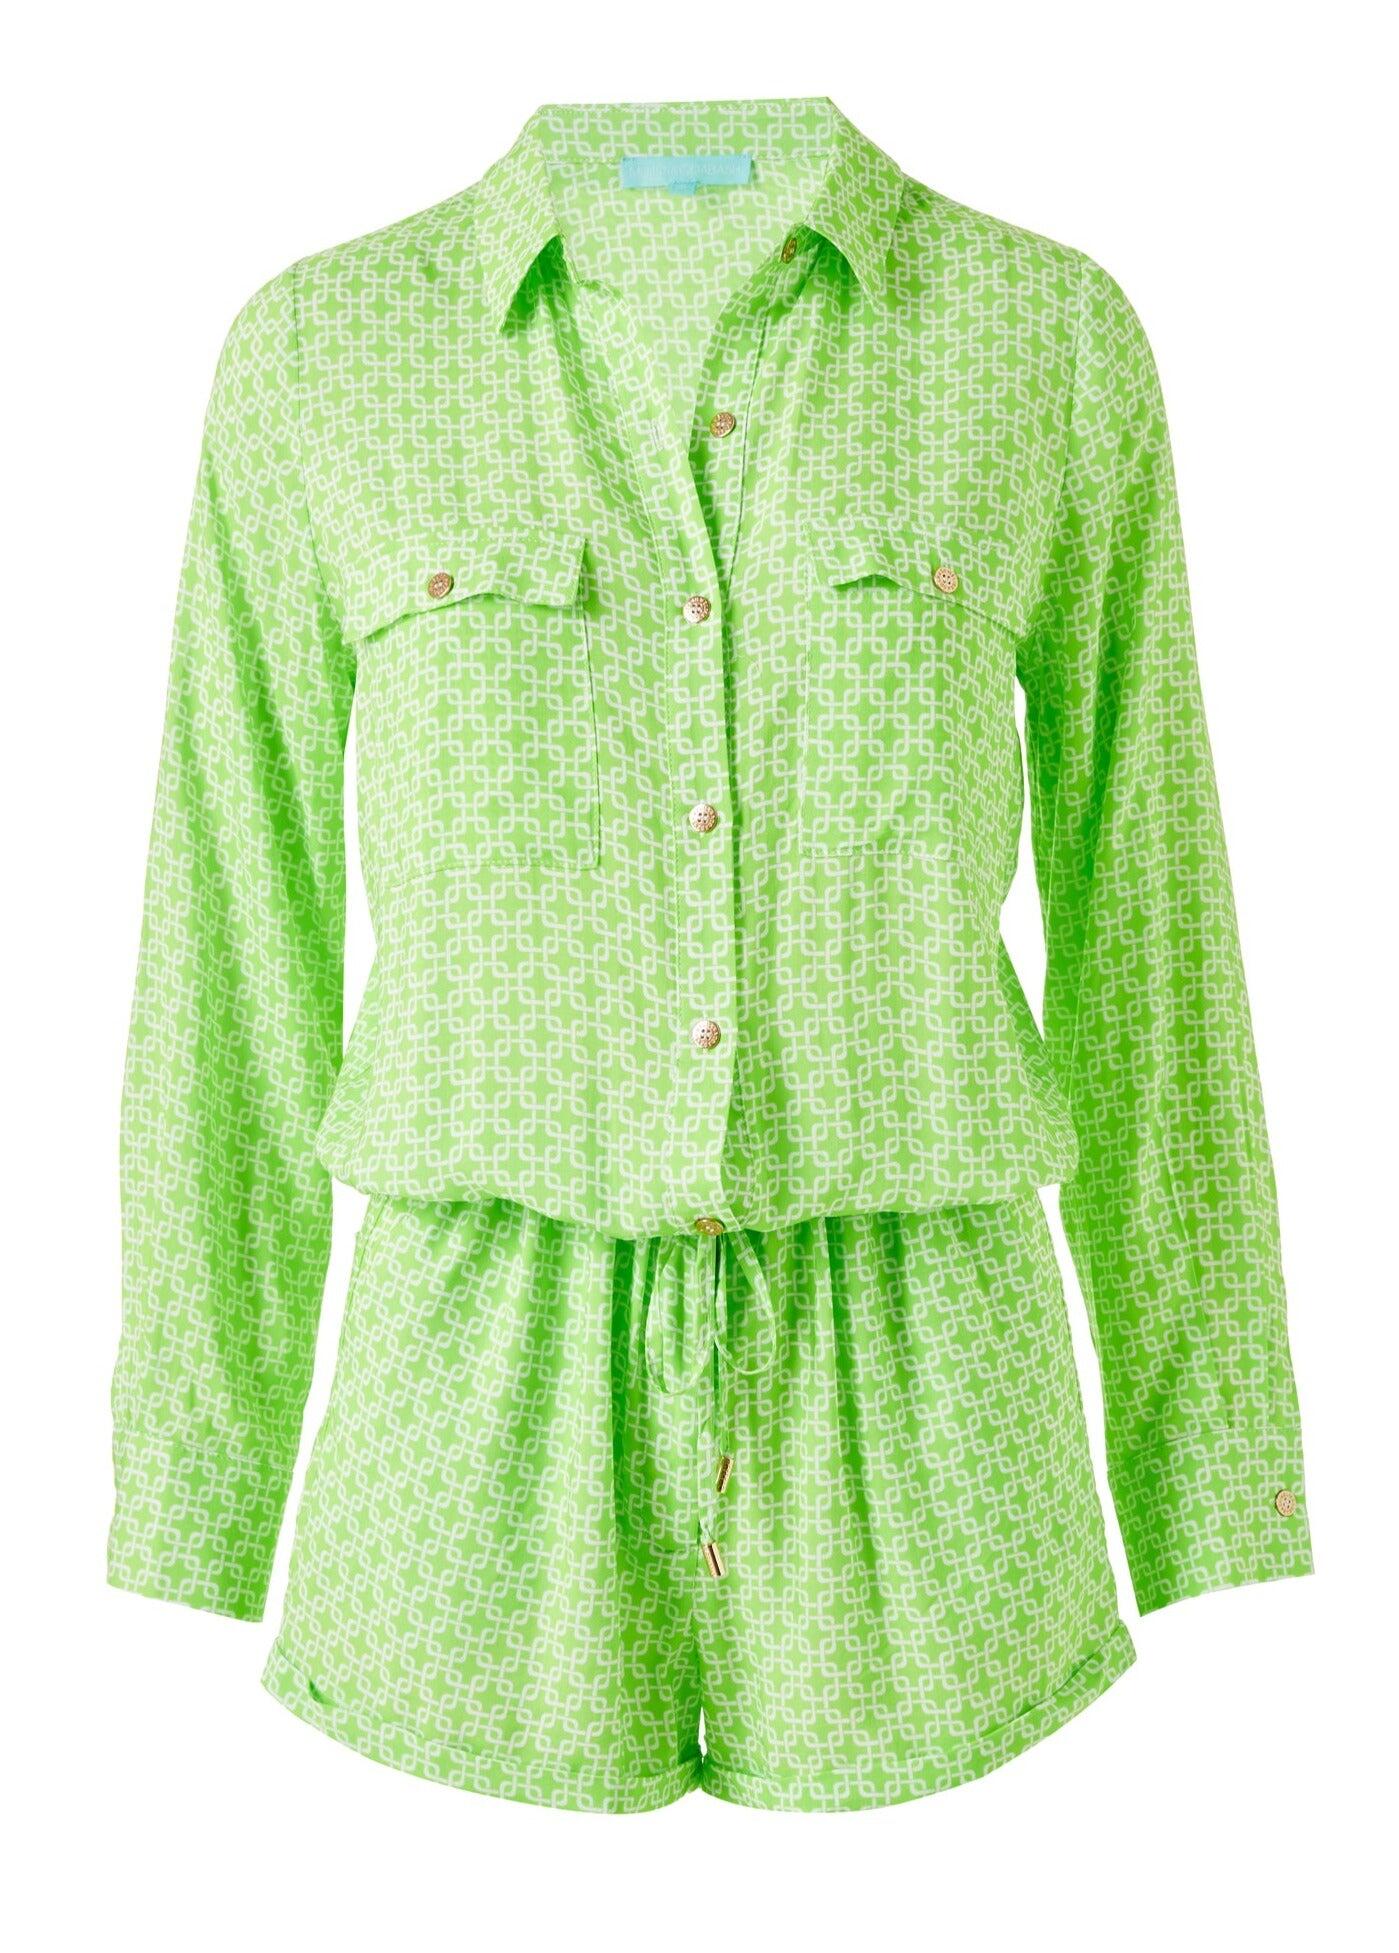 Womens Playsuit in Lime | Melissa Odabash Playsuit Lime